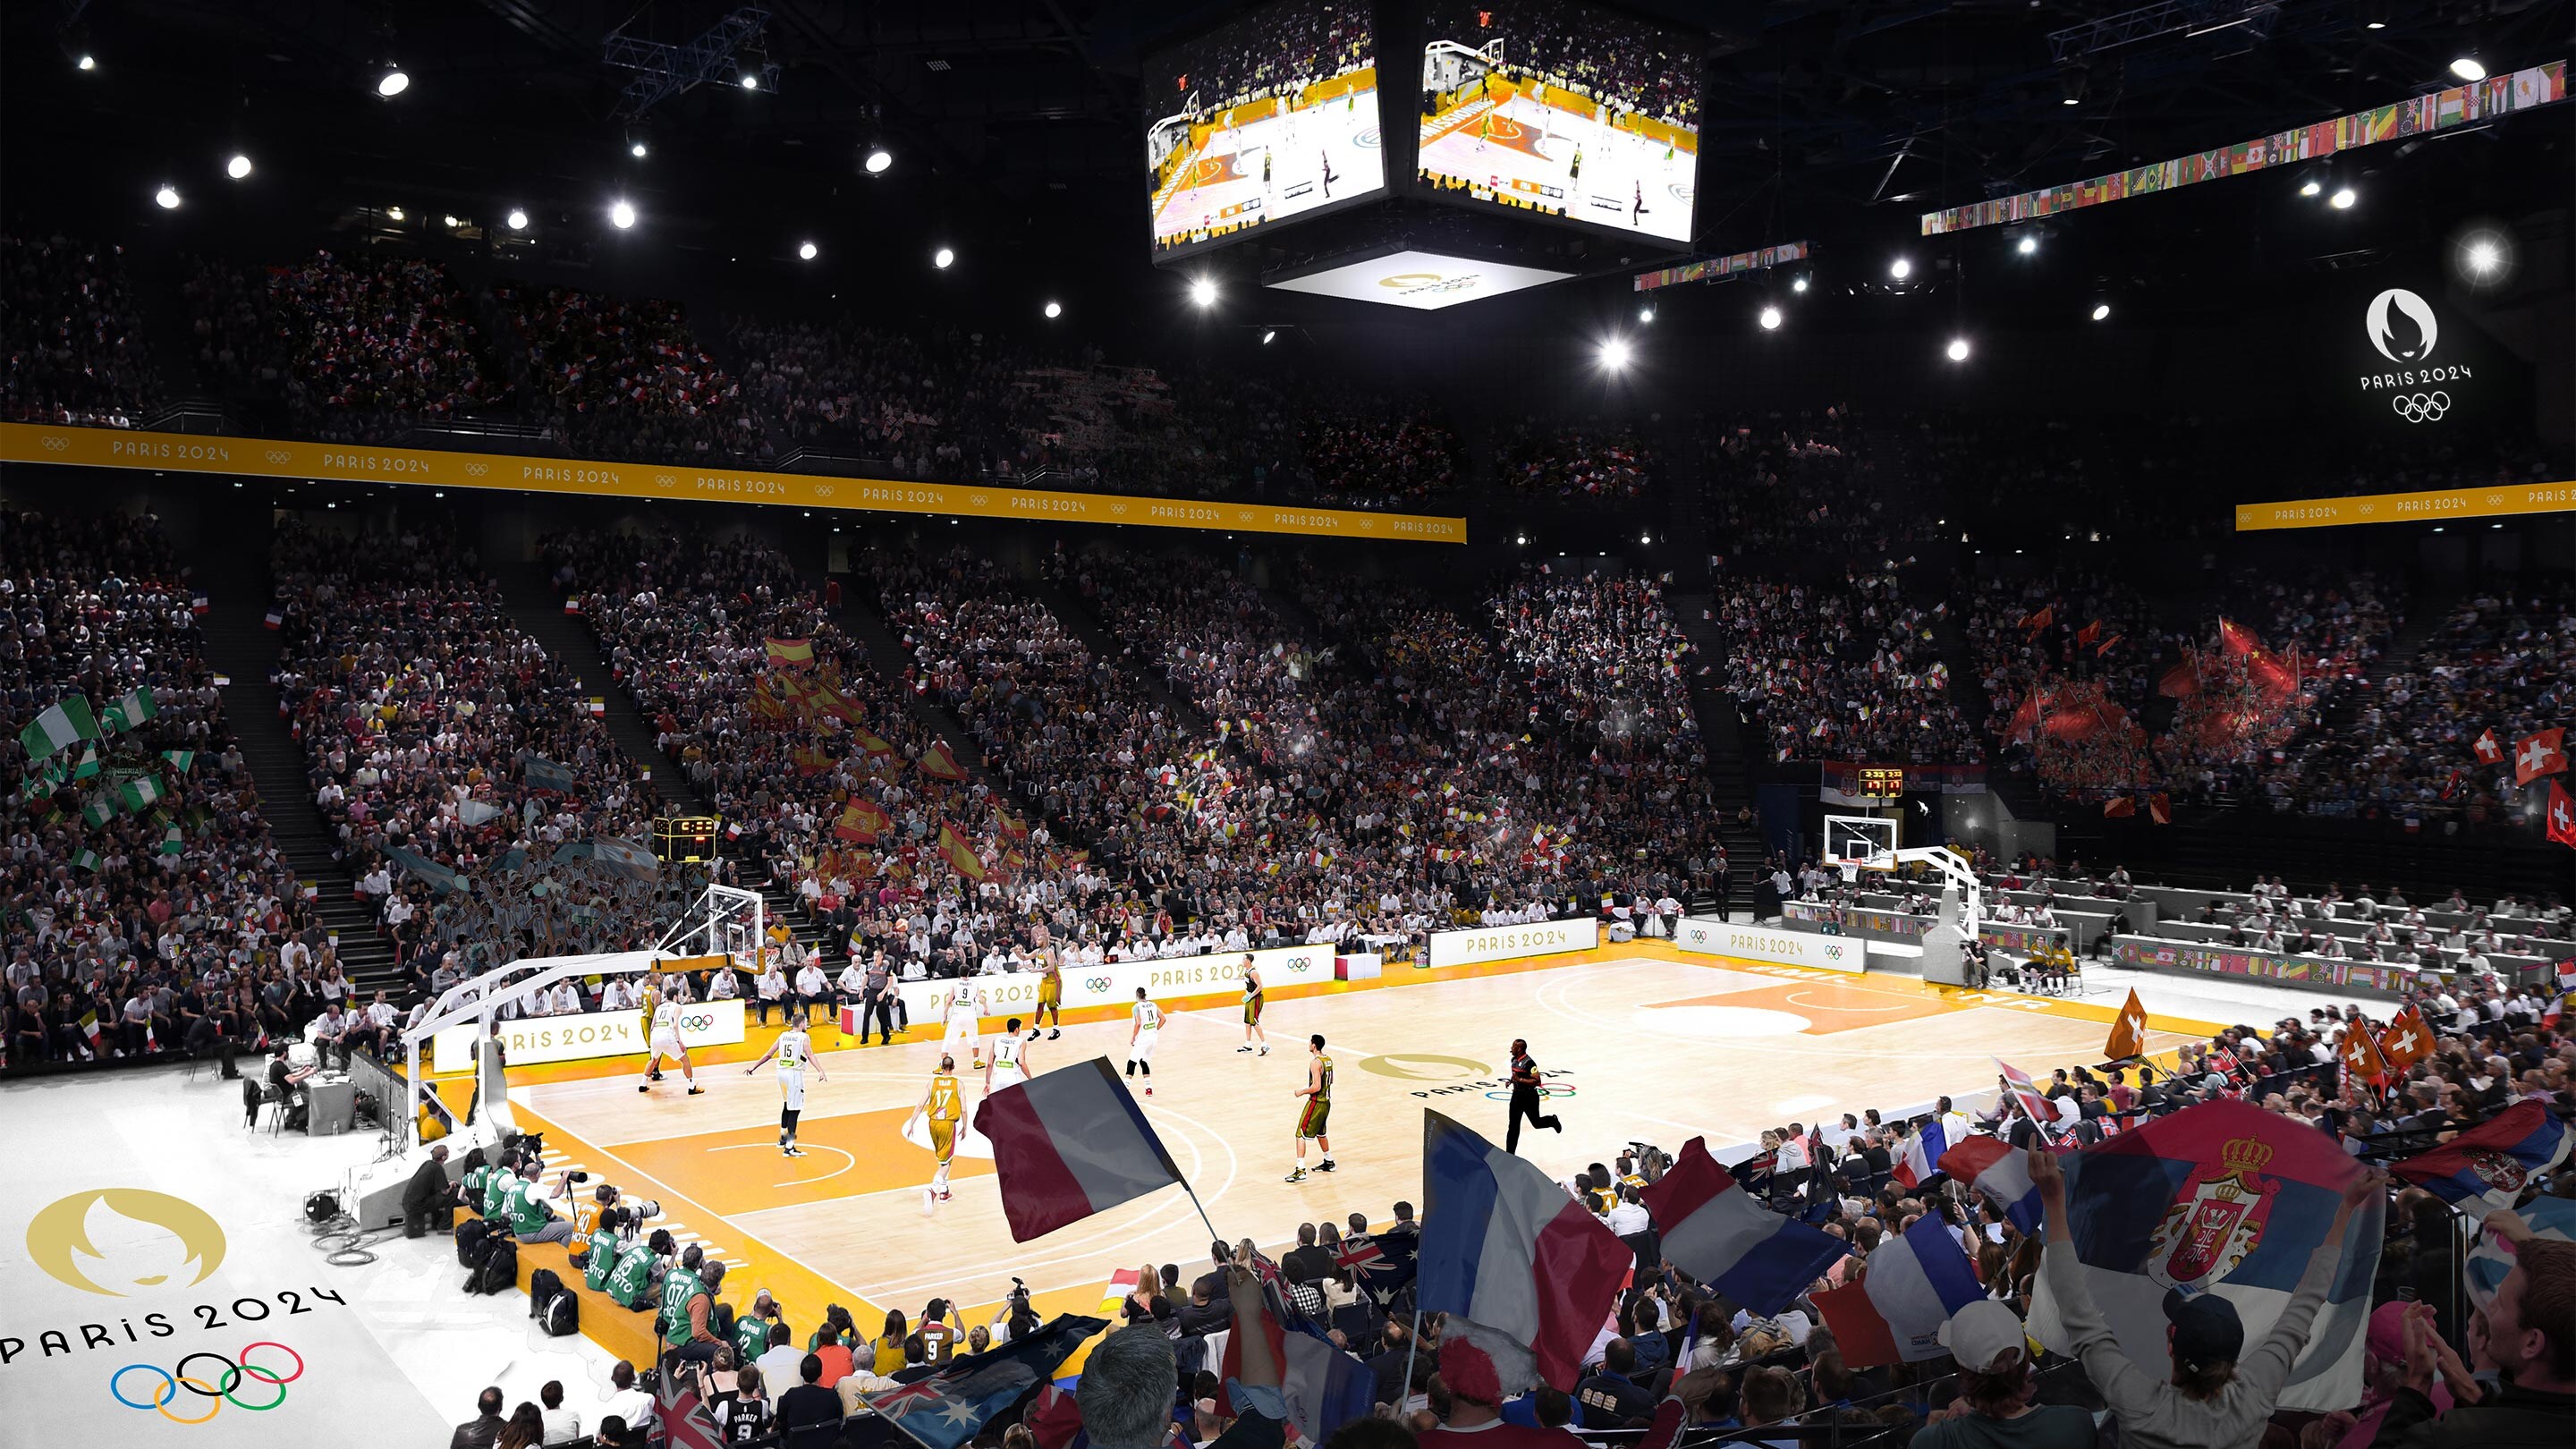 Paris 2024 unveils third phase of ticketing for the Games, including